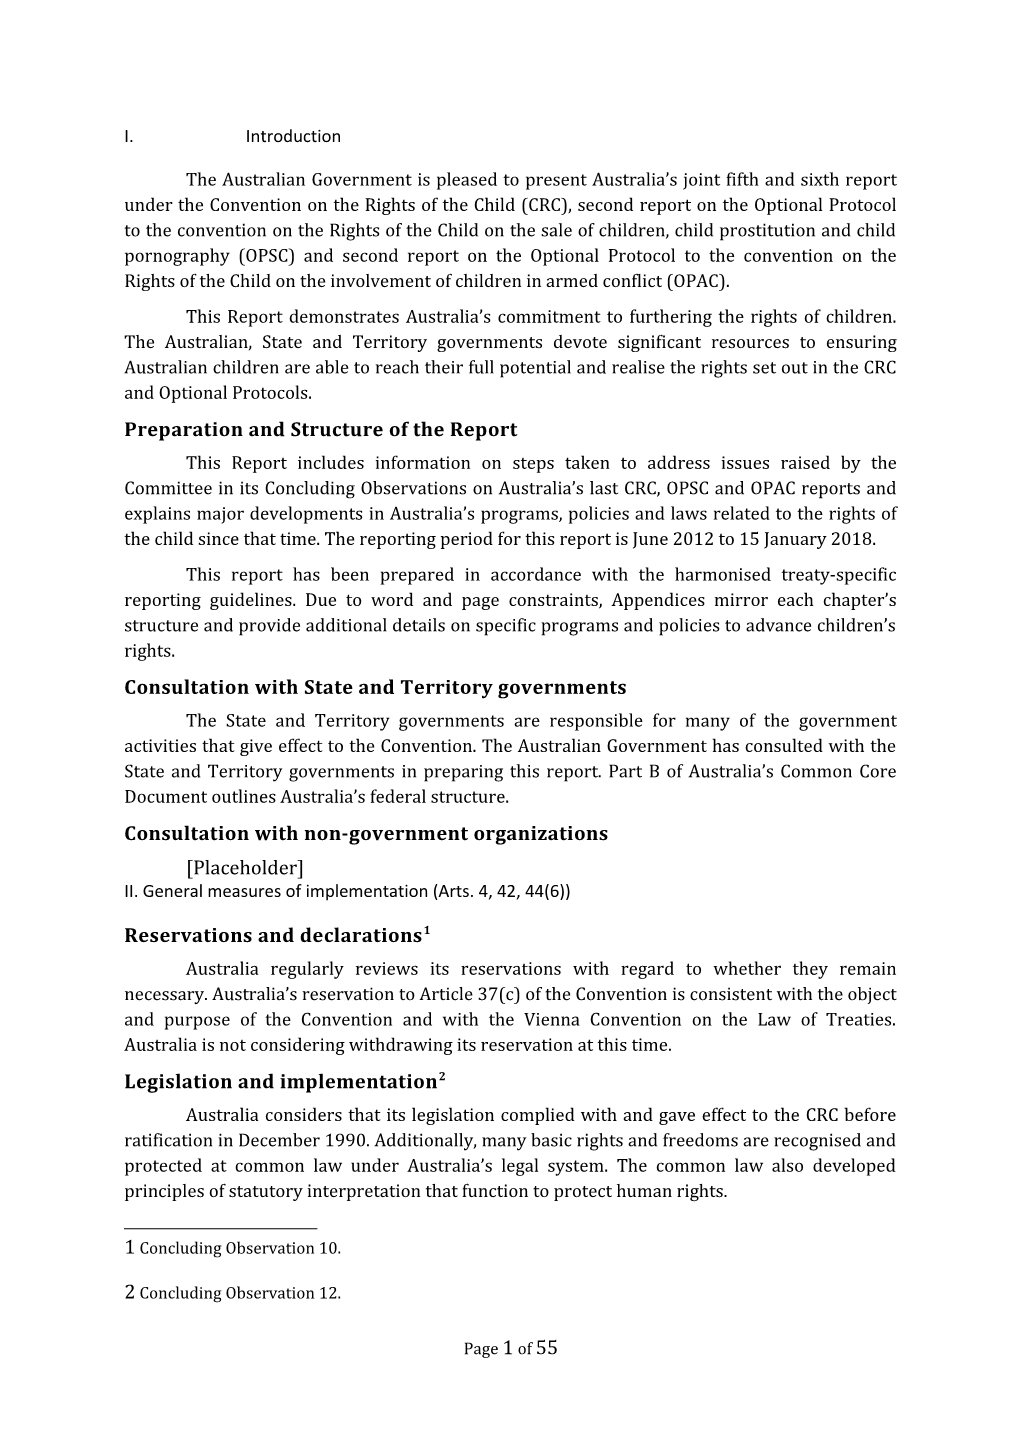 Australia S Draft Report on the Convention on the Rights of the Child